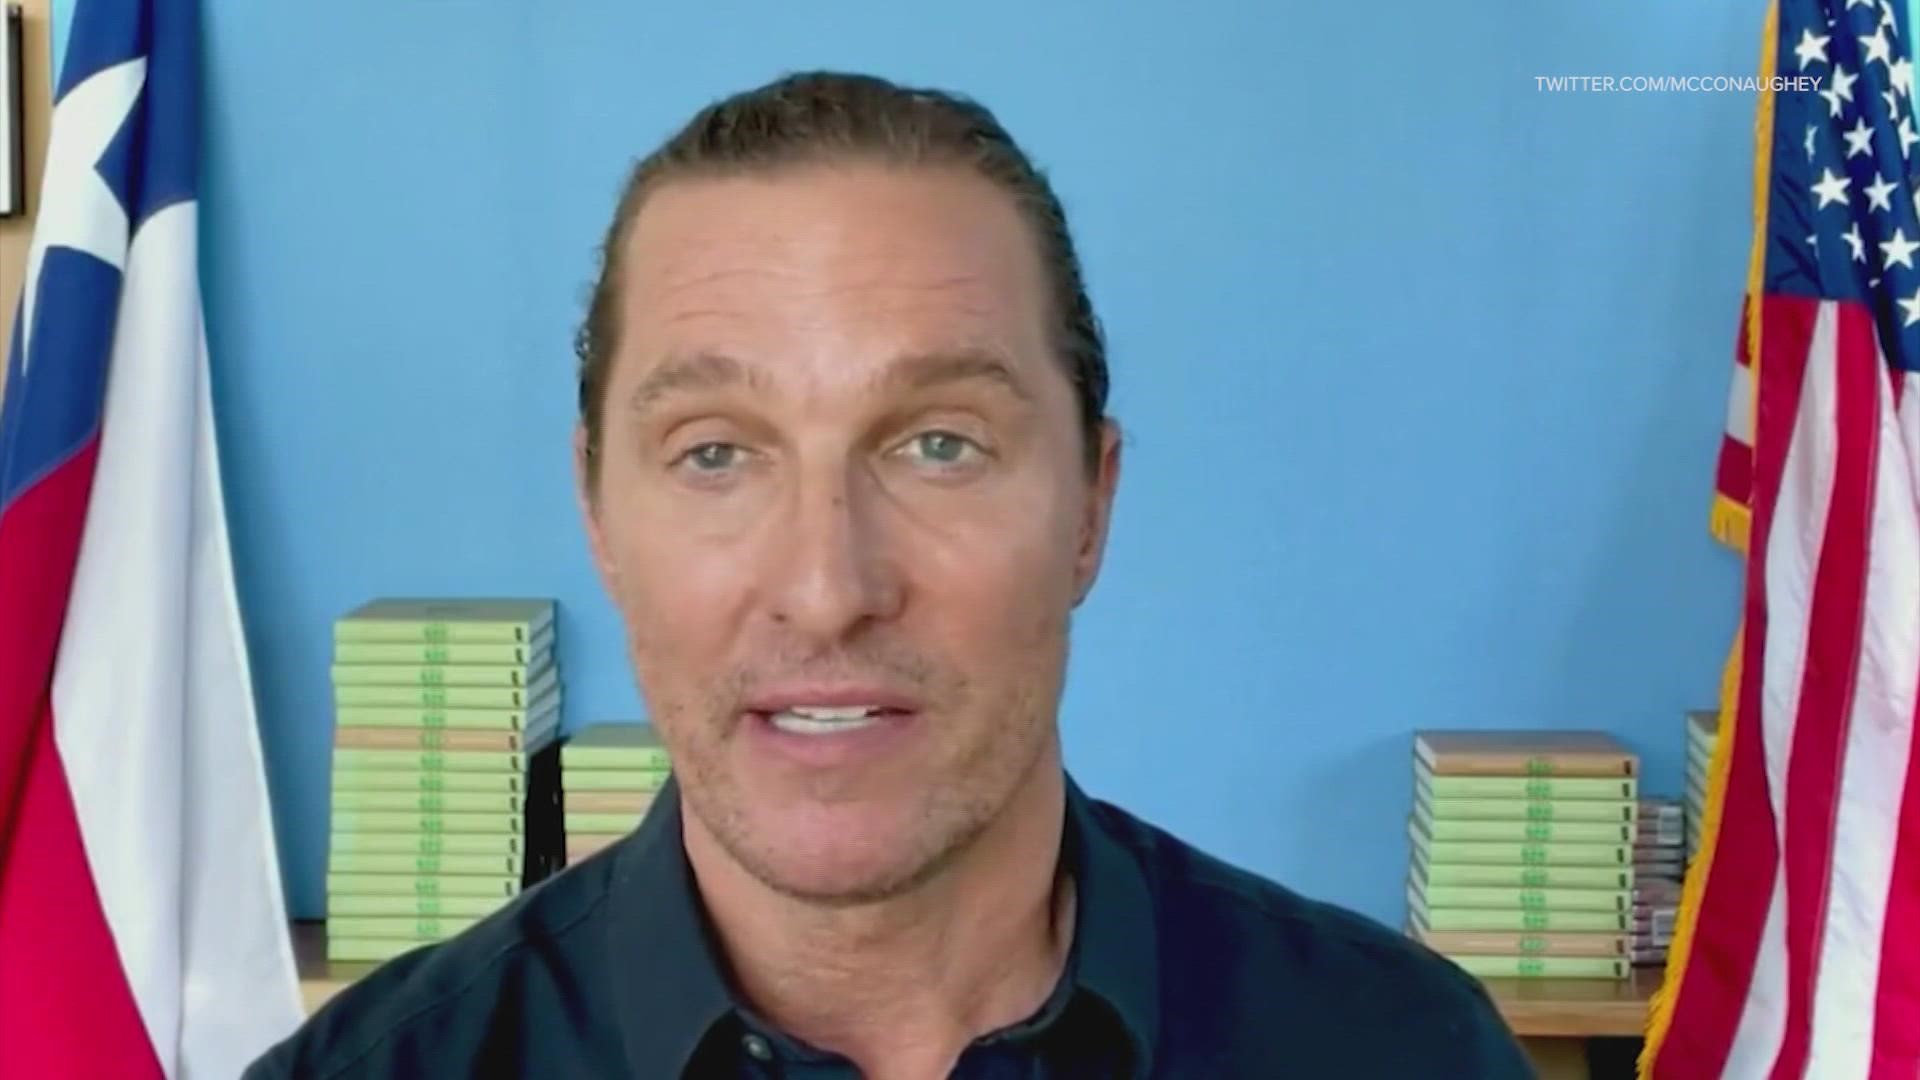 McConaughey made the announcement via a Twitter video.